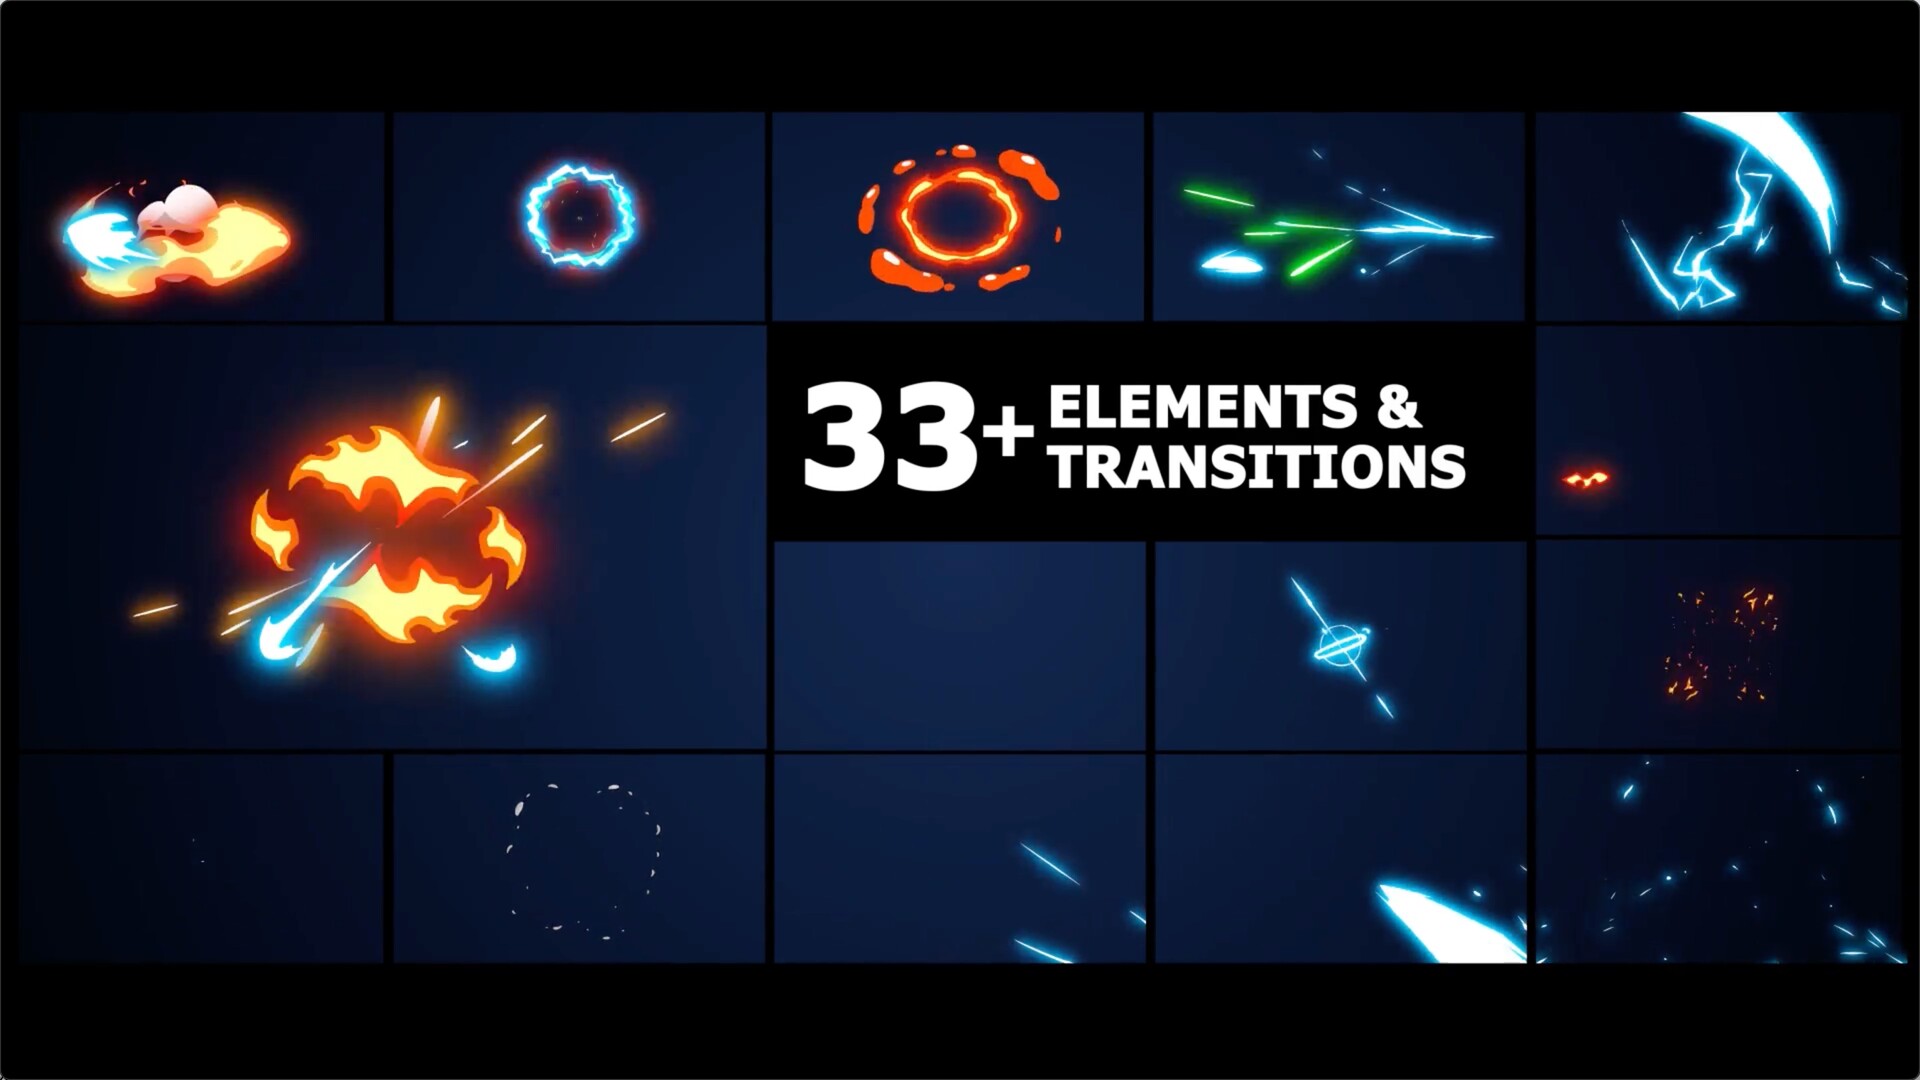 FCPX插件：卡通爆炸电力元素Elements And Transitions